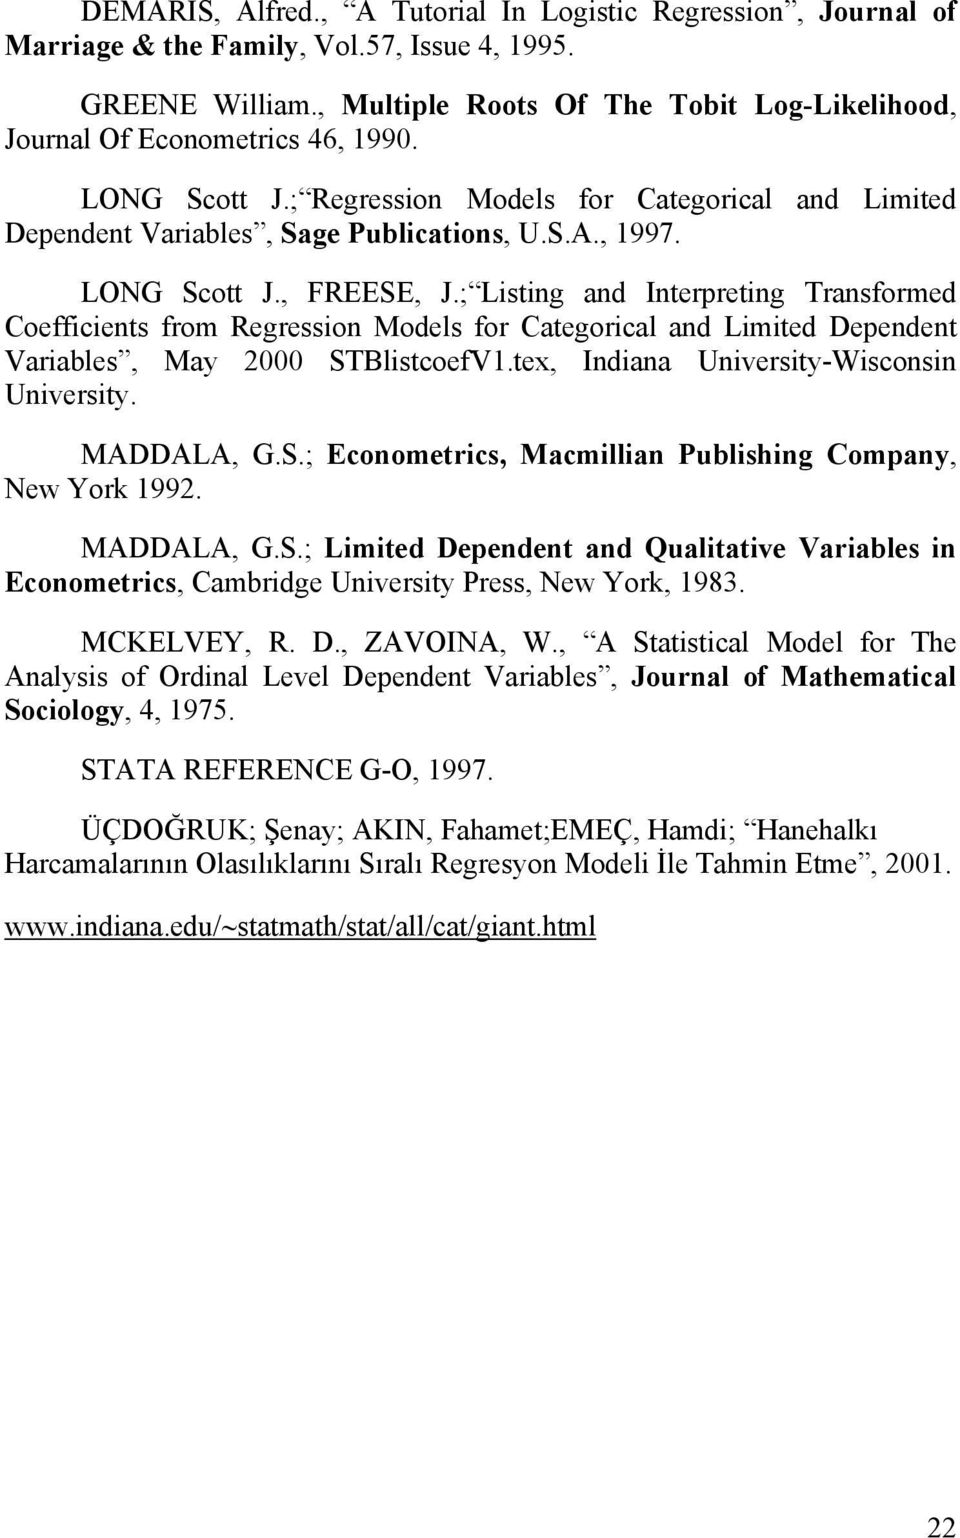 LONG Scott J., FREESE, J.; Listing and Interpreting Transformed Coefficients from Regression Models for Categorical and Limited Dependent Variables, May 2000 STBlistcoefV1.